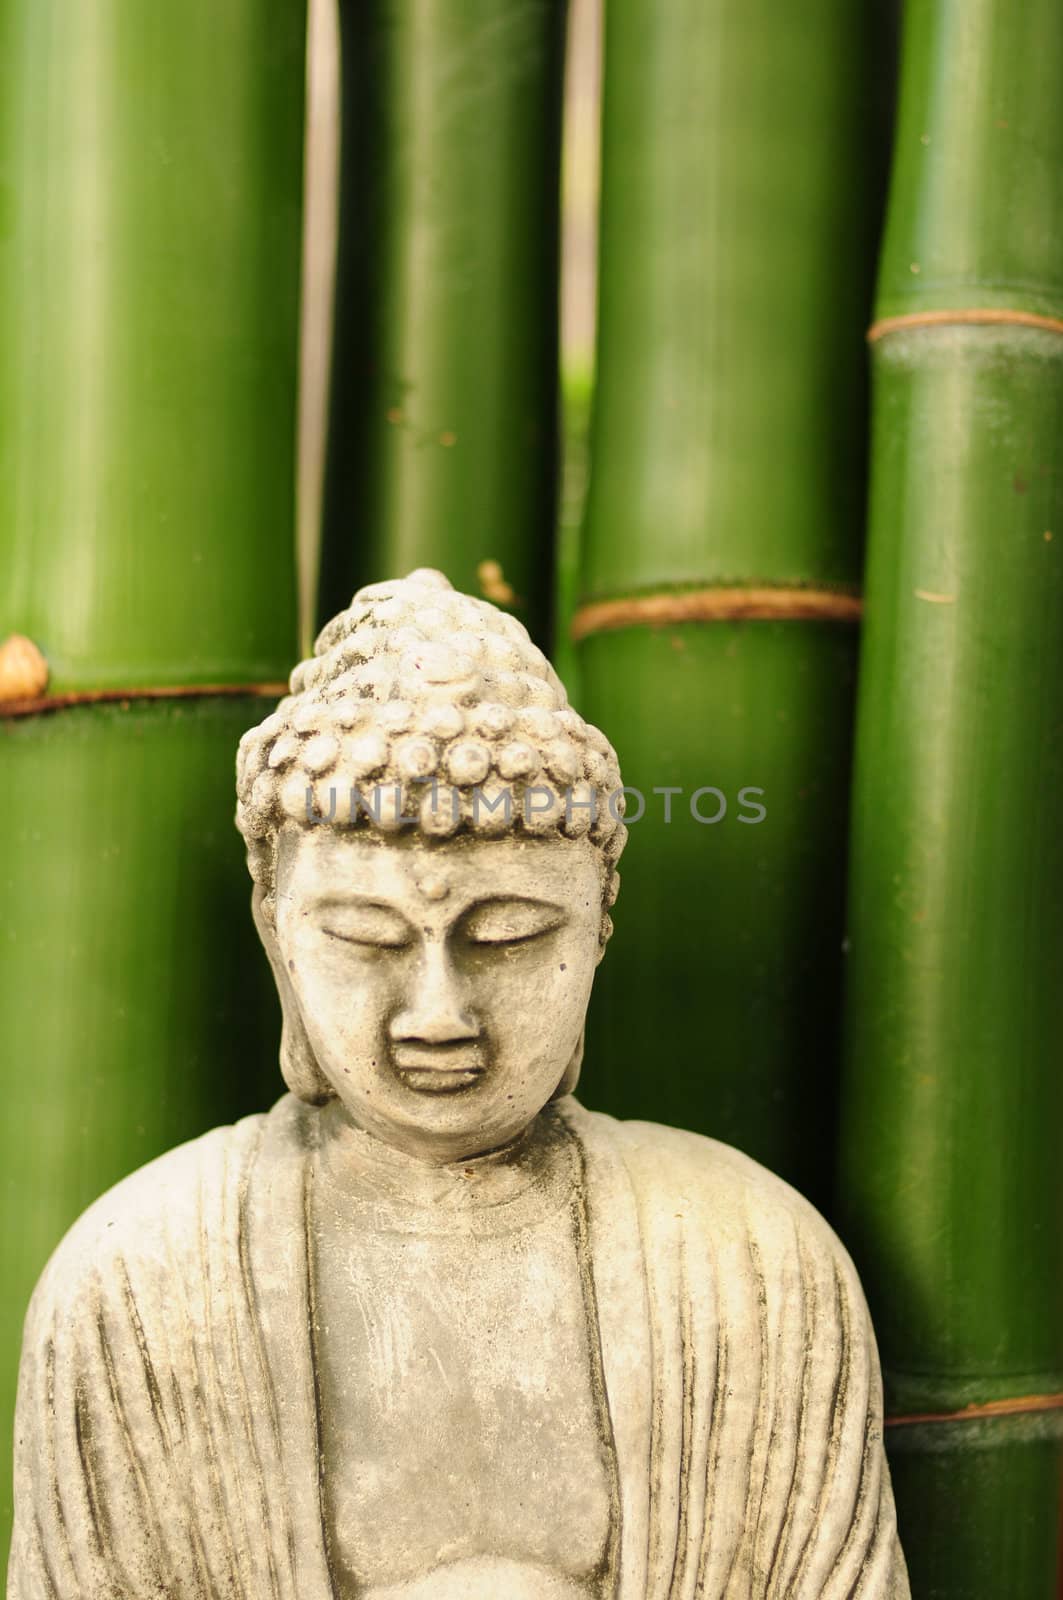 Buddha with bamboo in background in tropical setting